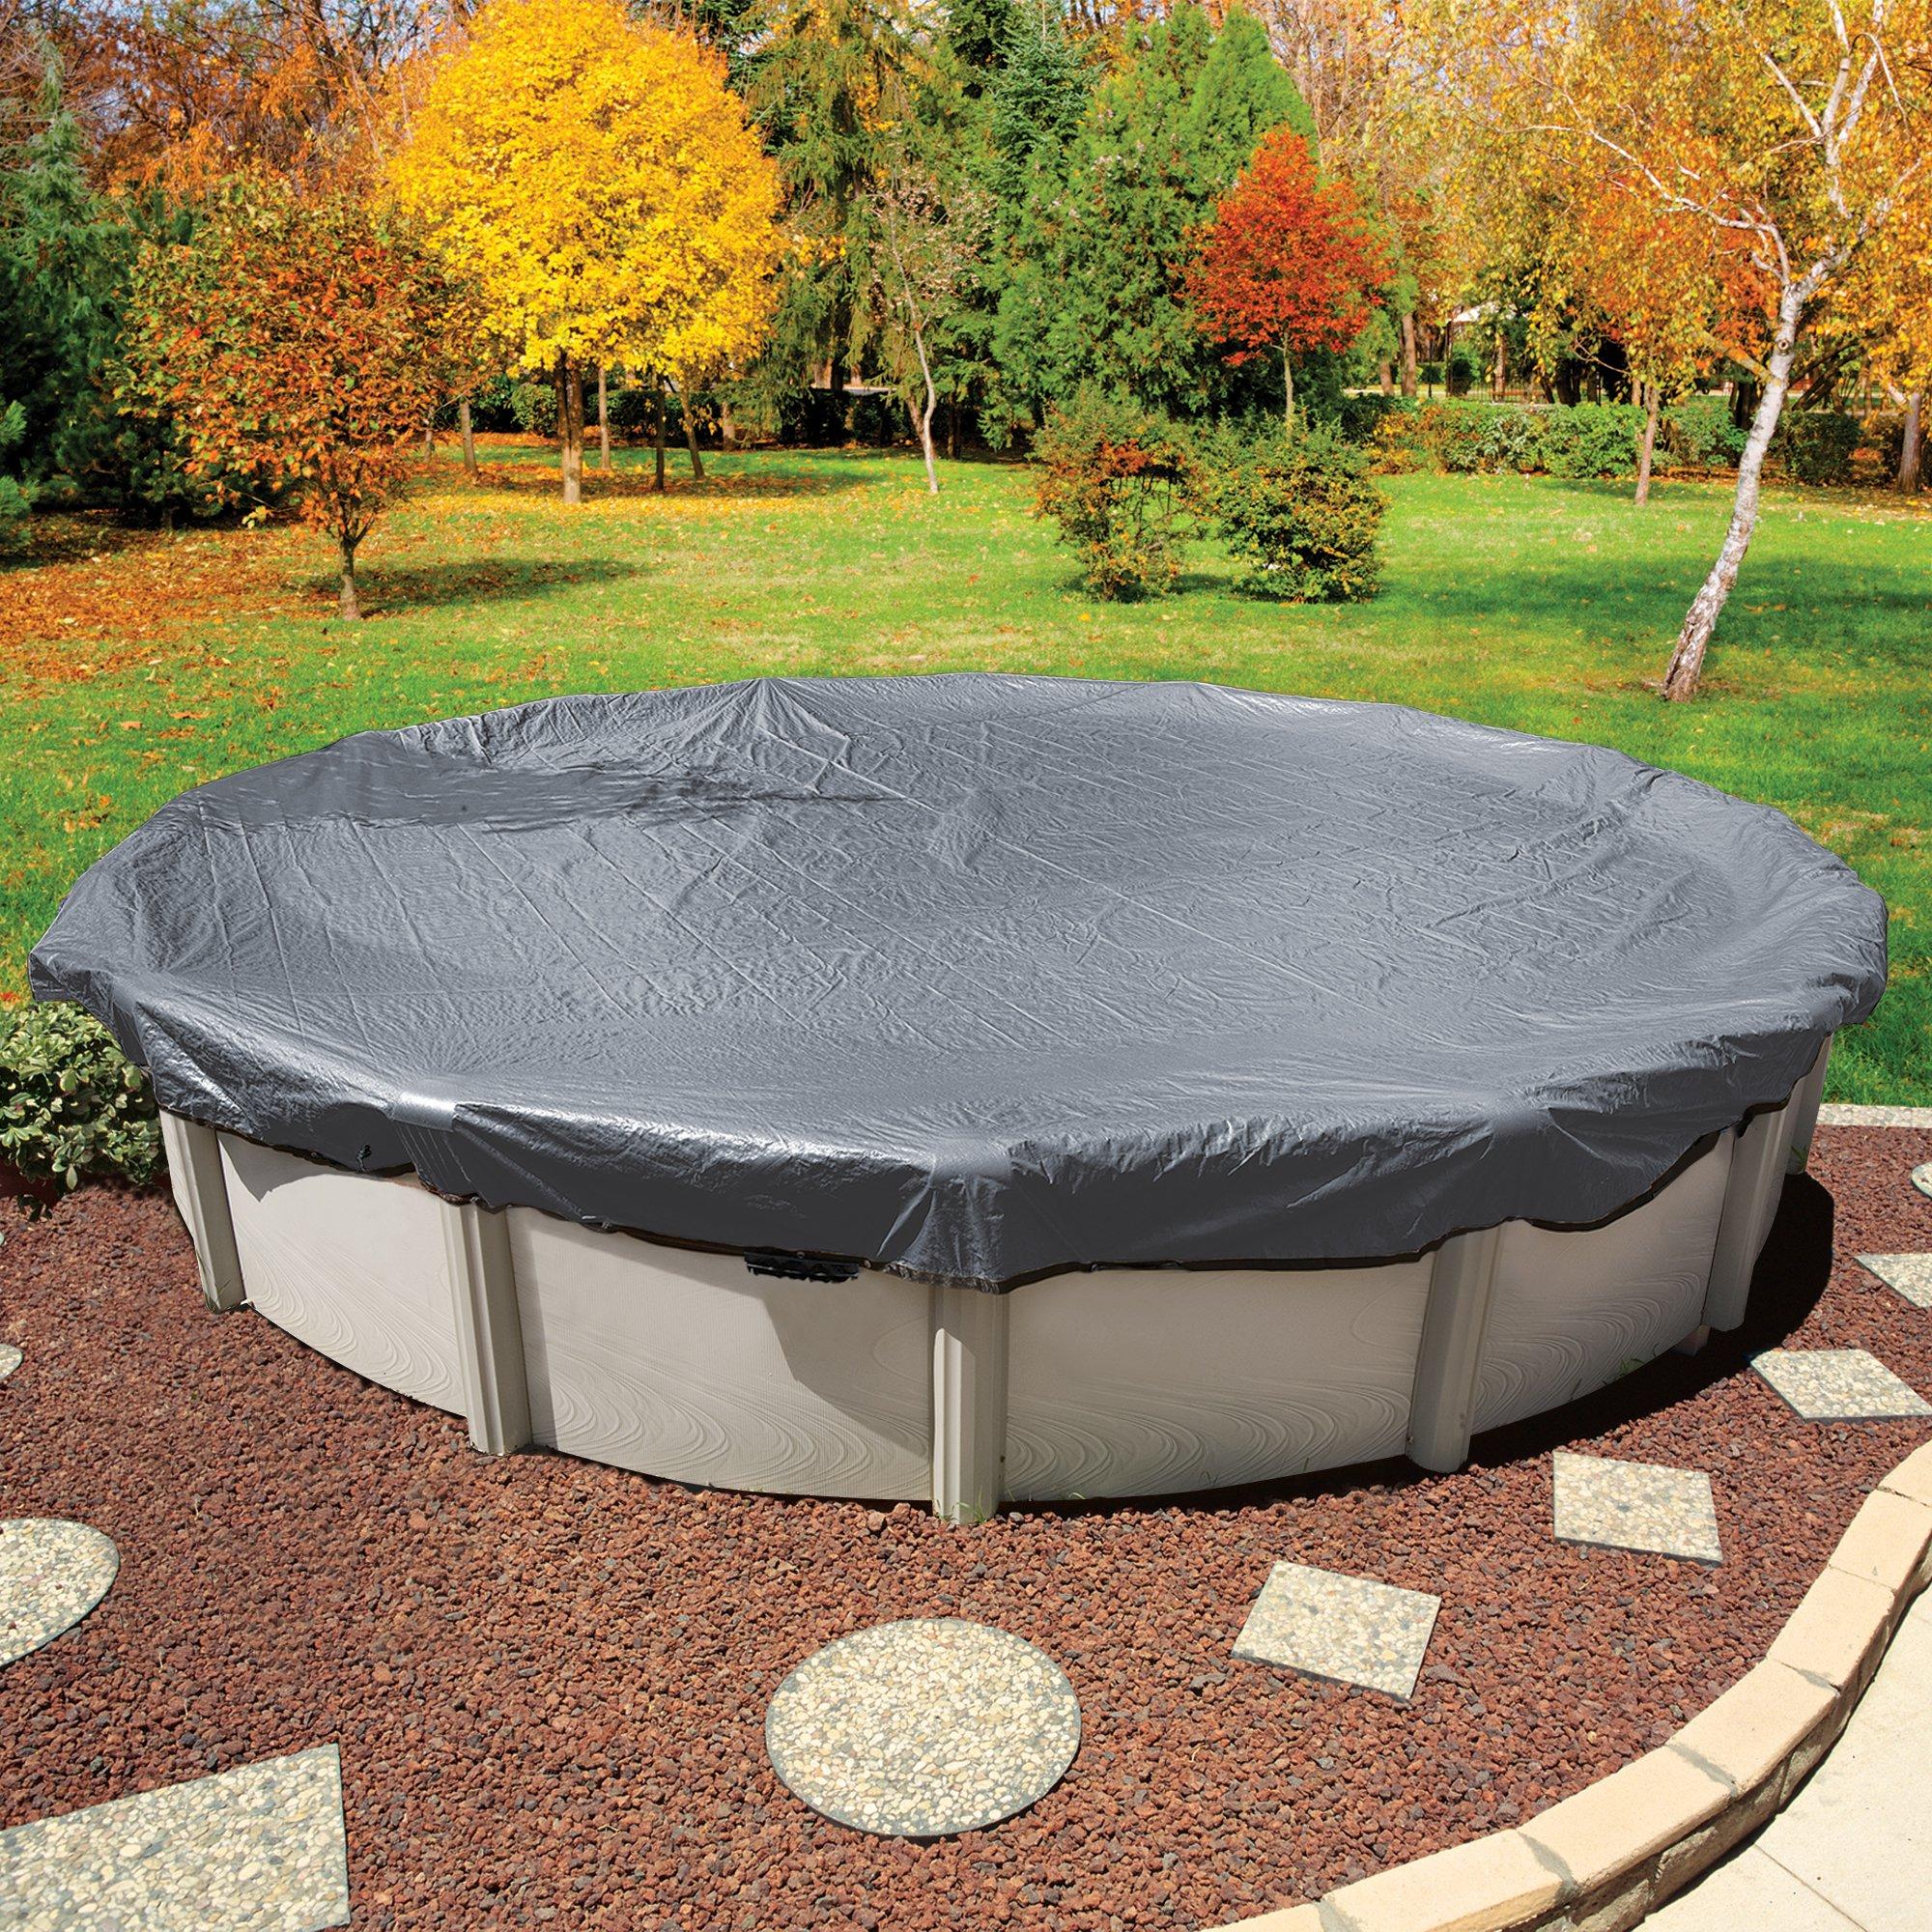 Midwest Canvas  18 Round Winter Pool Cover 16 Year Warranty Silver